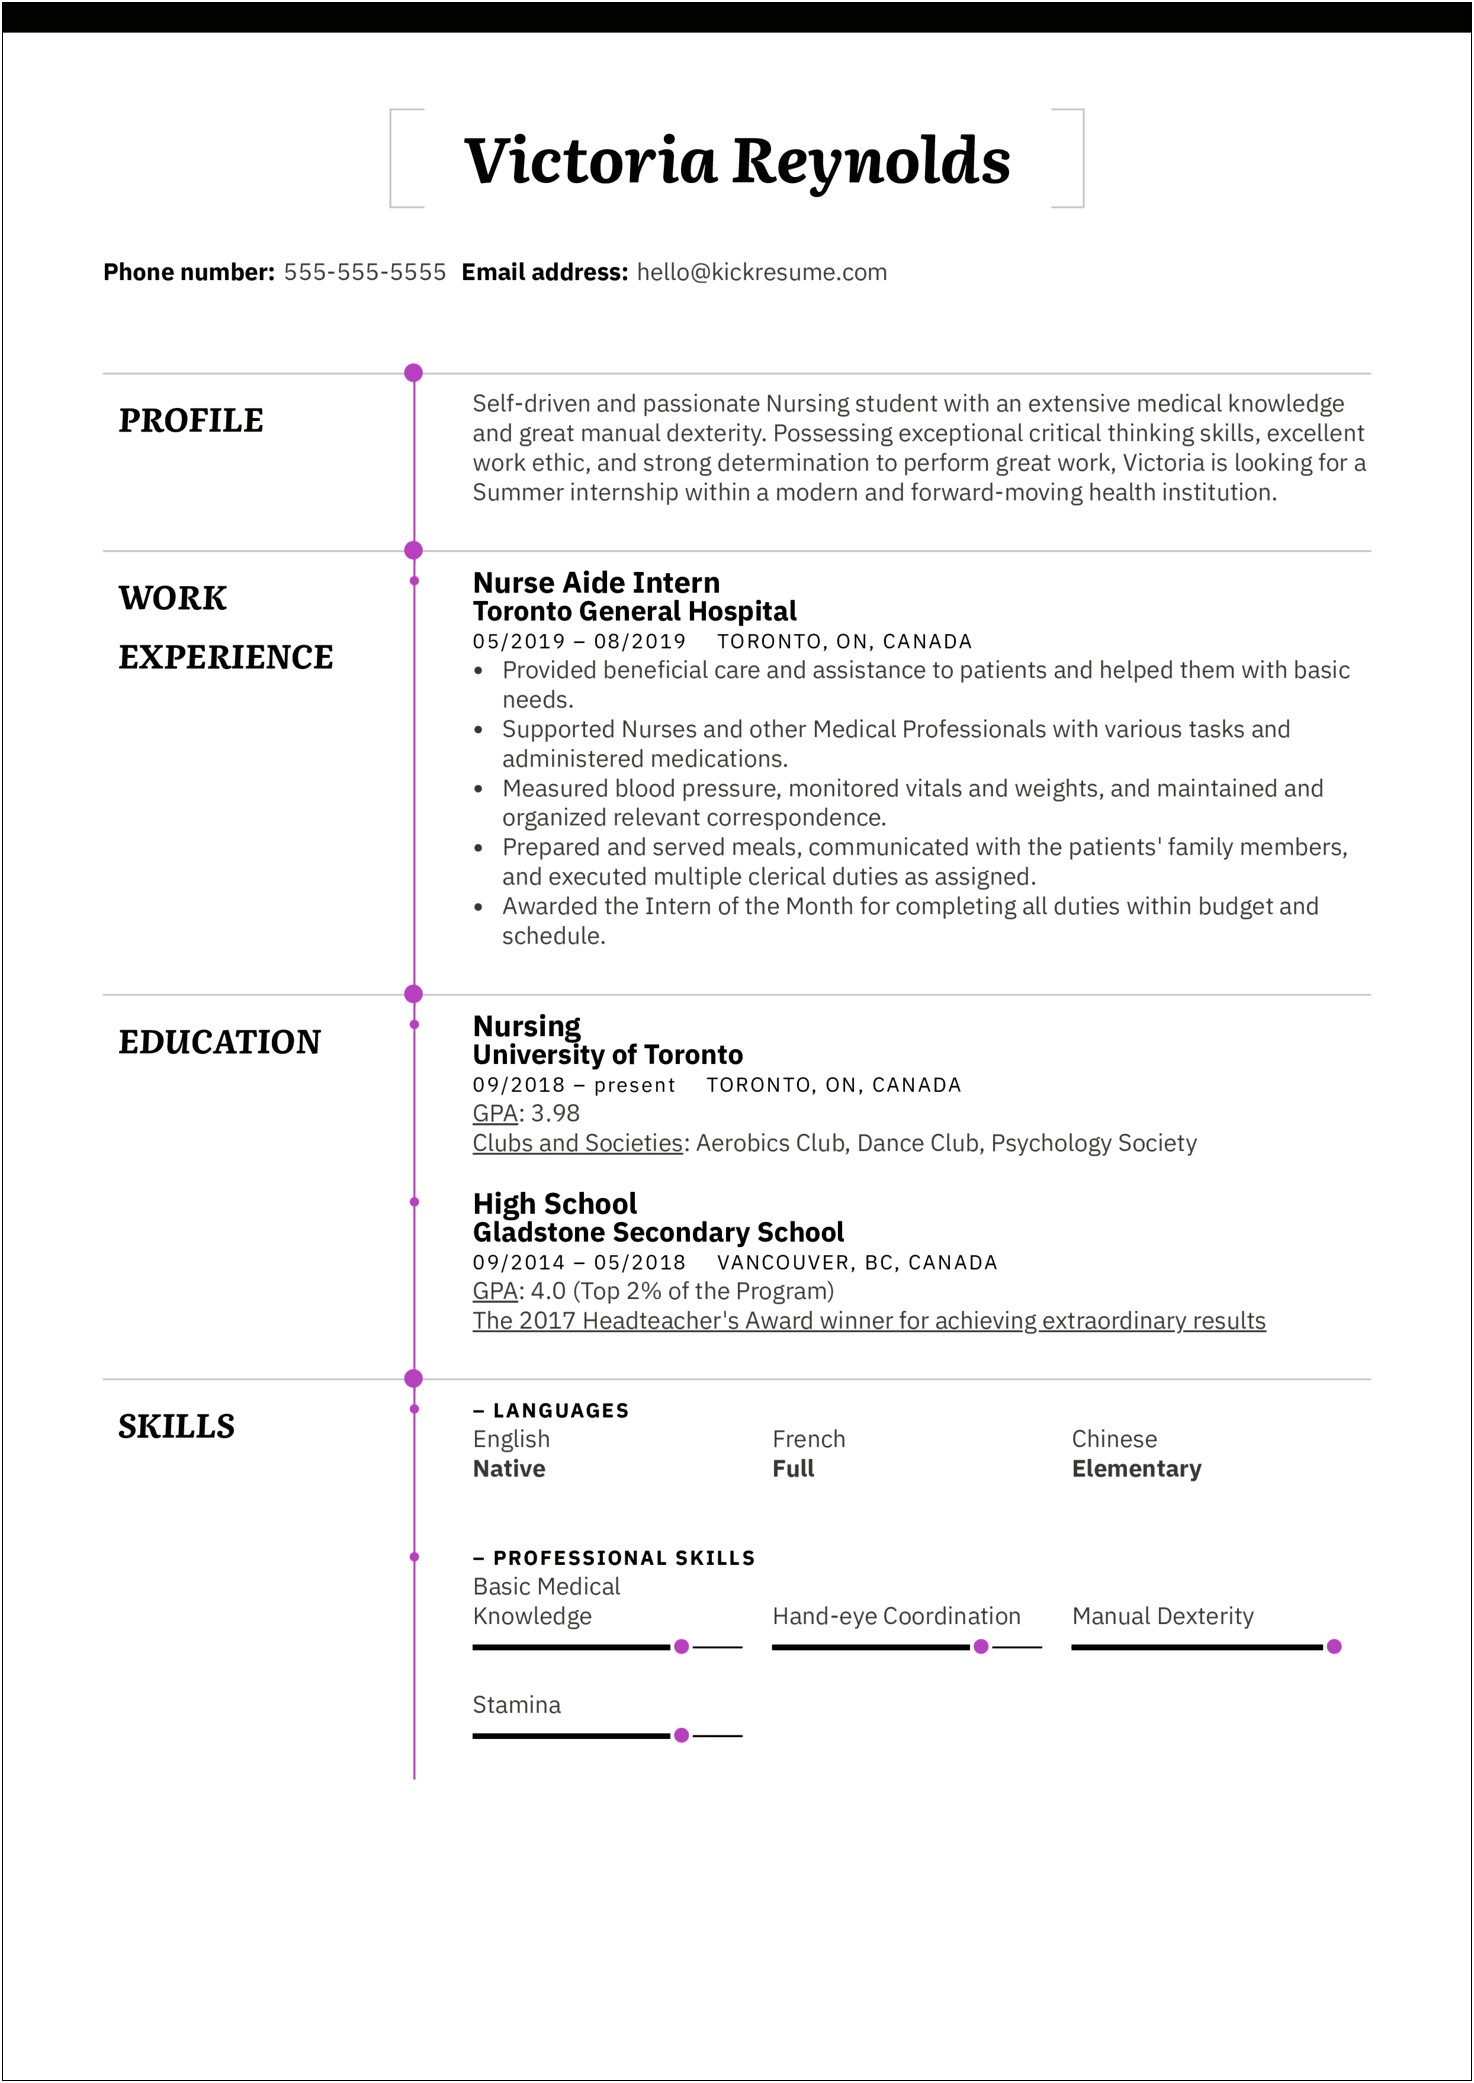 Resume Objective For A Nursing Student